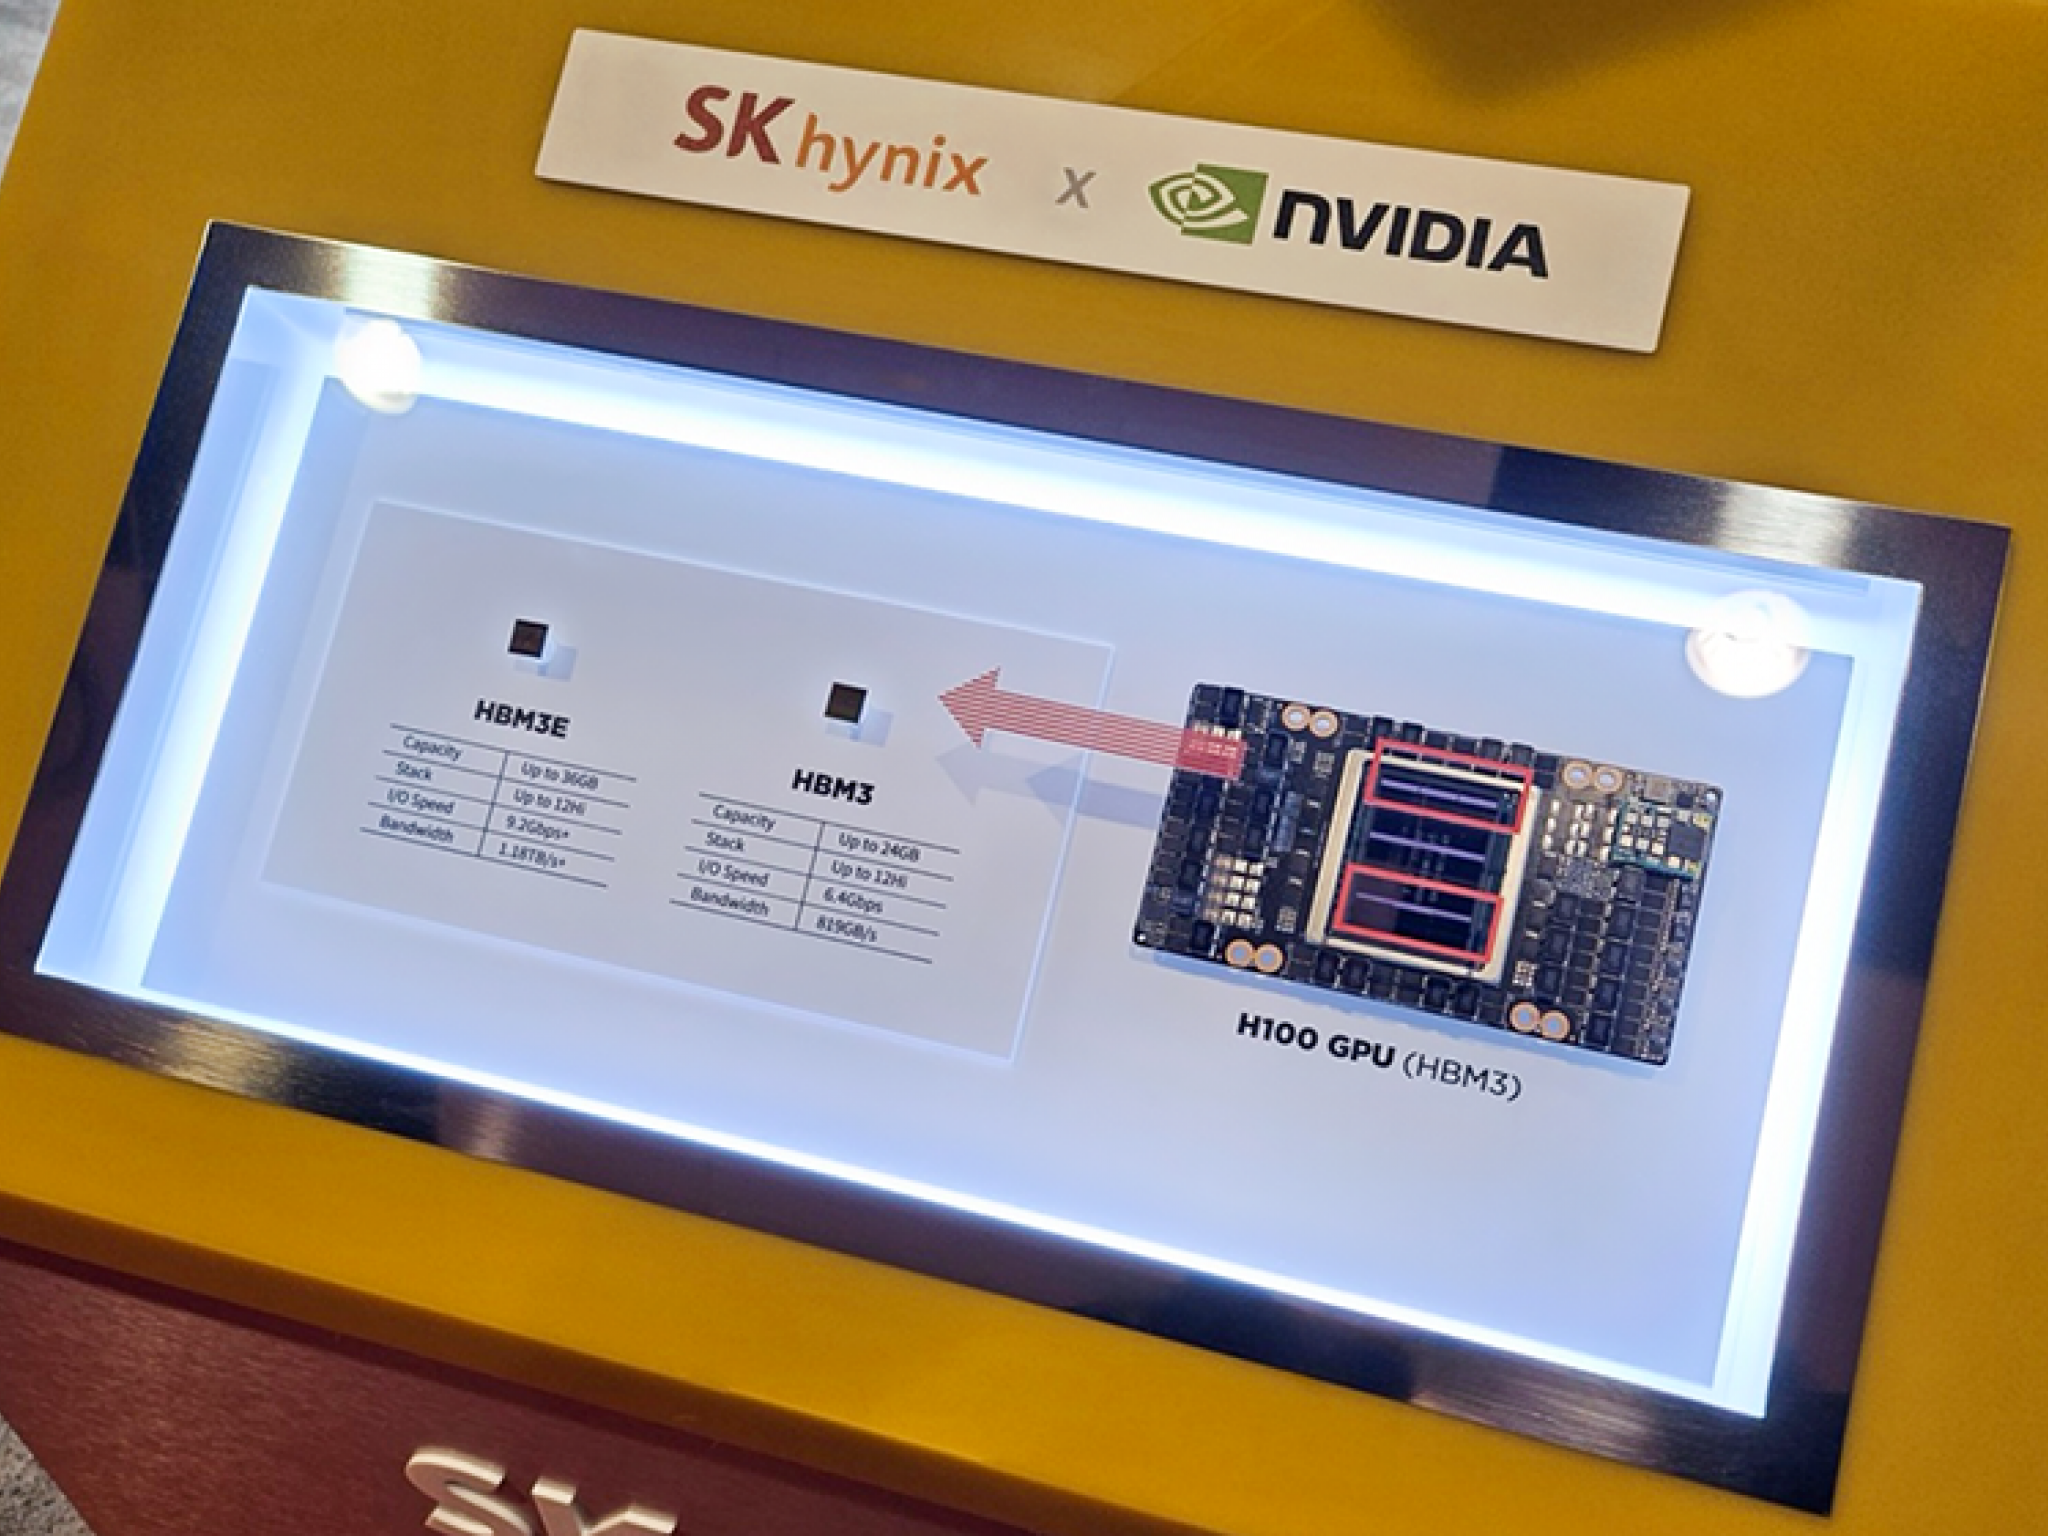  key-nvidia-supplier-sk-hynix-to-get-further-boost-from-ai-demand-even-after-90-stock-surge-goldman-sachs-and-citi-predict 